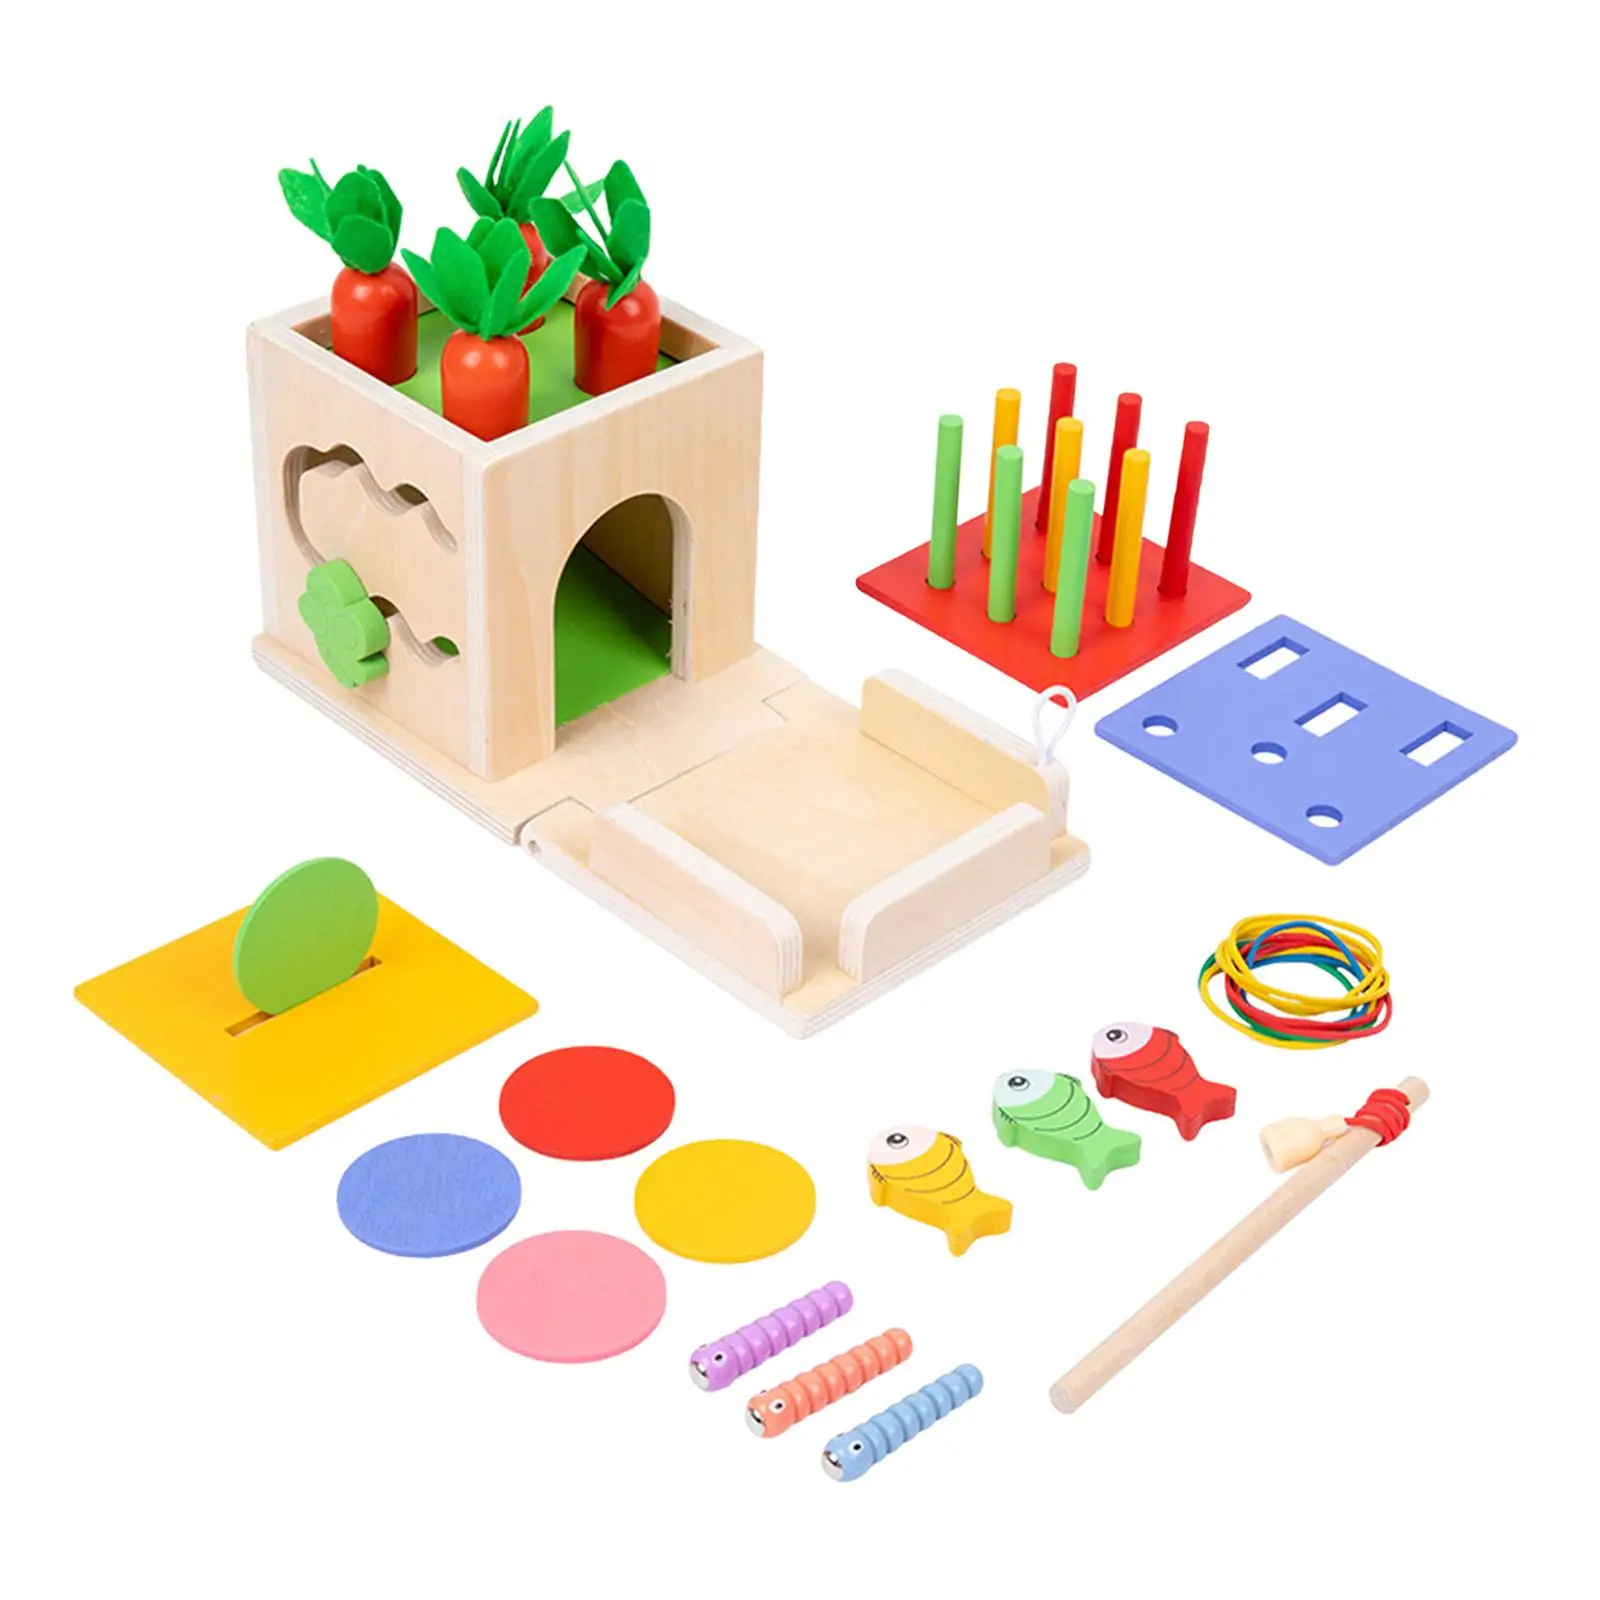 Montessori Toddler Play Kit Montessori Coin Box Gear Wooden Toy Box Set Educational Toys for 1 2 3 Year Old Baby Girls Boys Gift